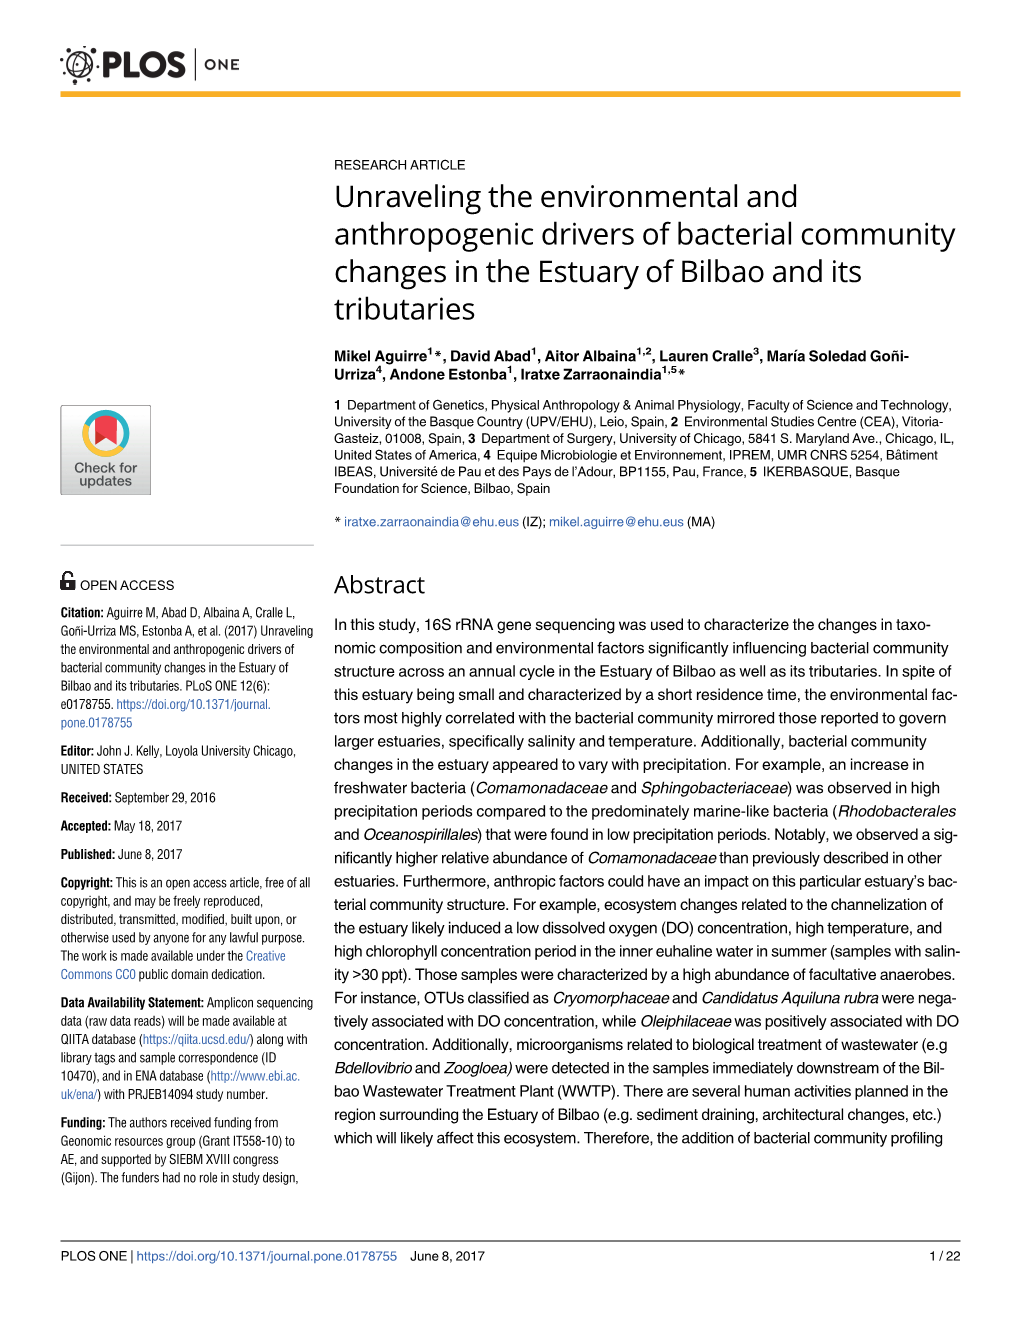 Unraveling the Environmental and Anthropogenic Drivers of Bacterial Community Changes in the Estuary of Bilbao and Its Tributaries